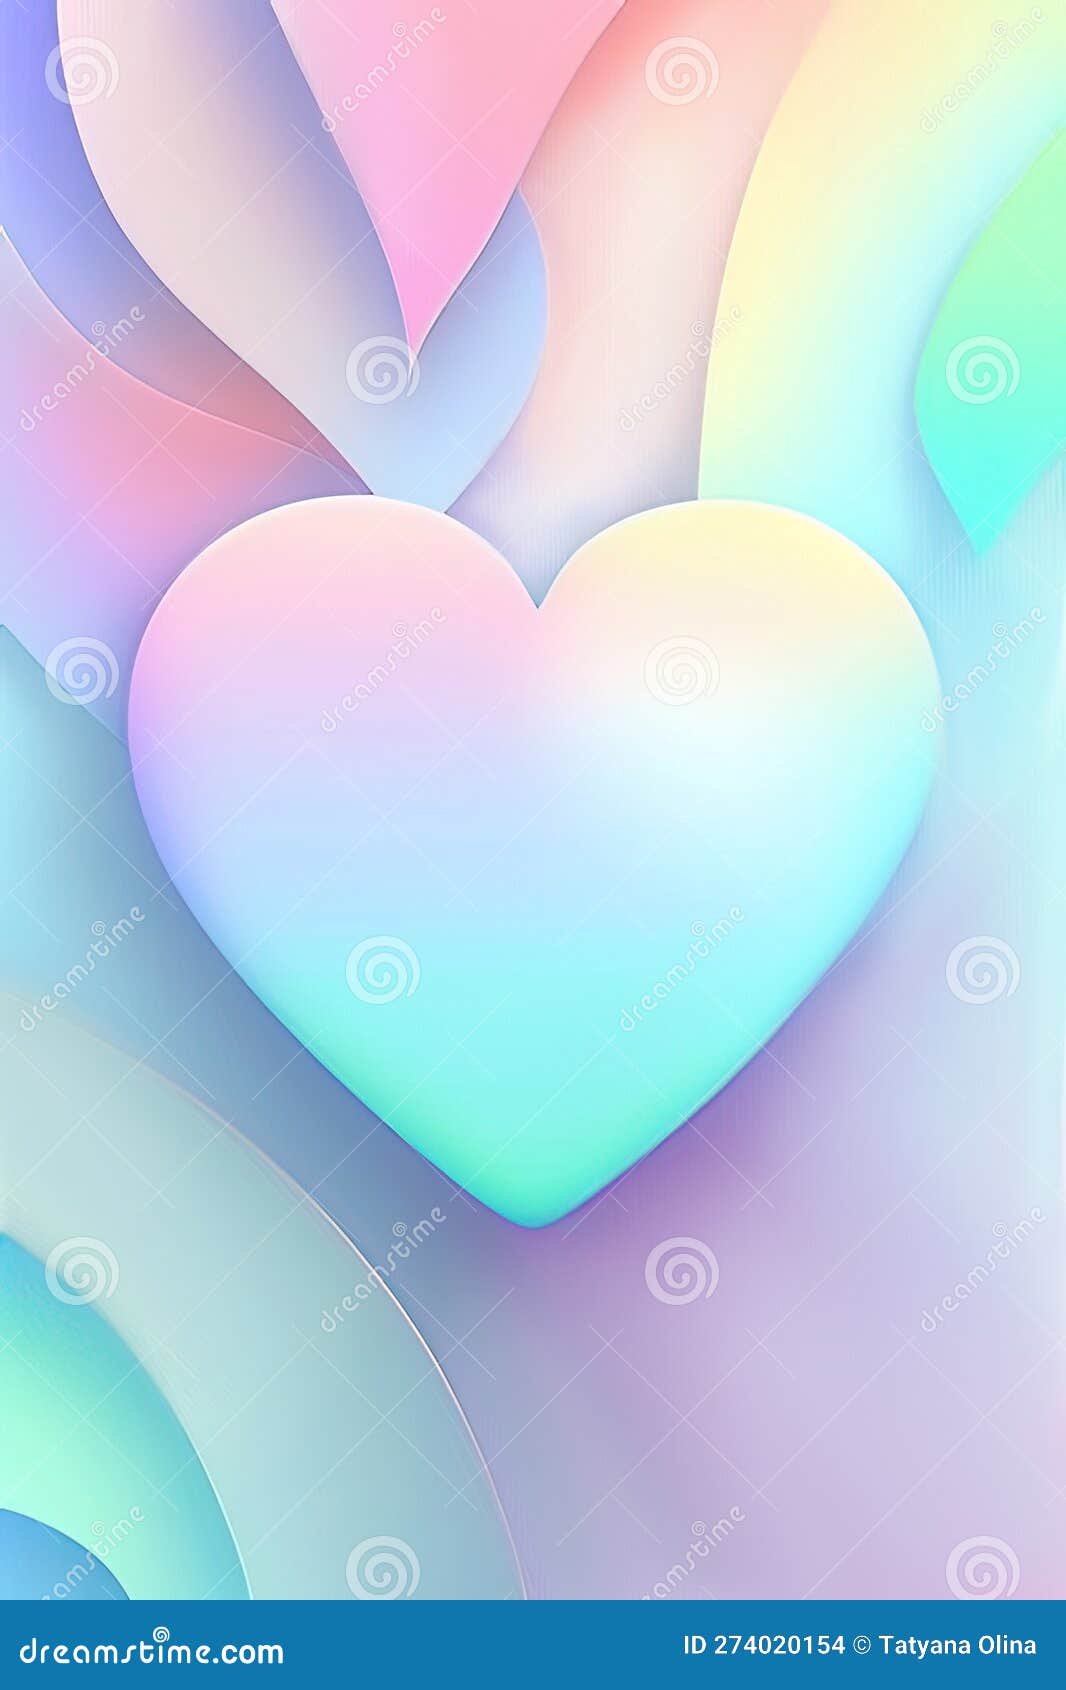 Baby Cute Background With Colorful Hearts Wallpaper Image For Free Download   Pngtree